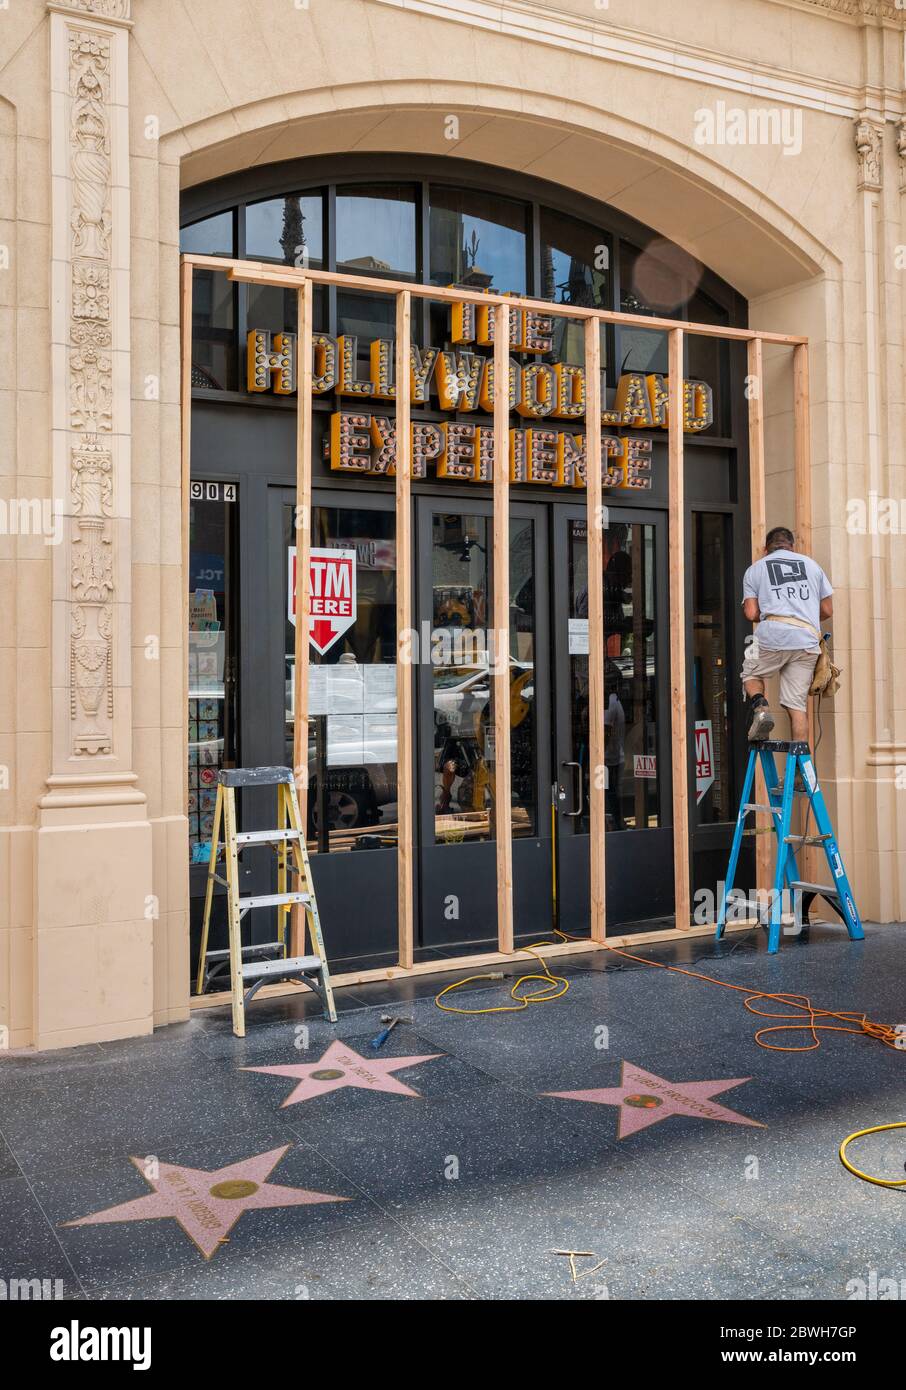 Los Angeles, USA, 1st June, 2020. Worker preemptively constructing wooden protective wall in front of the entrance to a gift shop called The Hollywood Experience, in response to looting and vandalism during the George Floyd protests. Credit: Jim Newberry/Alamy Live News. Stock Photo